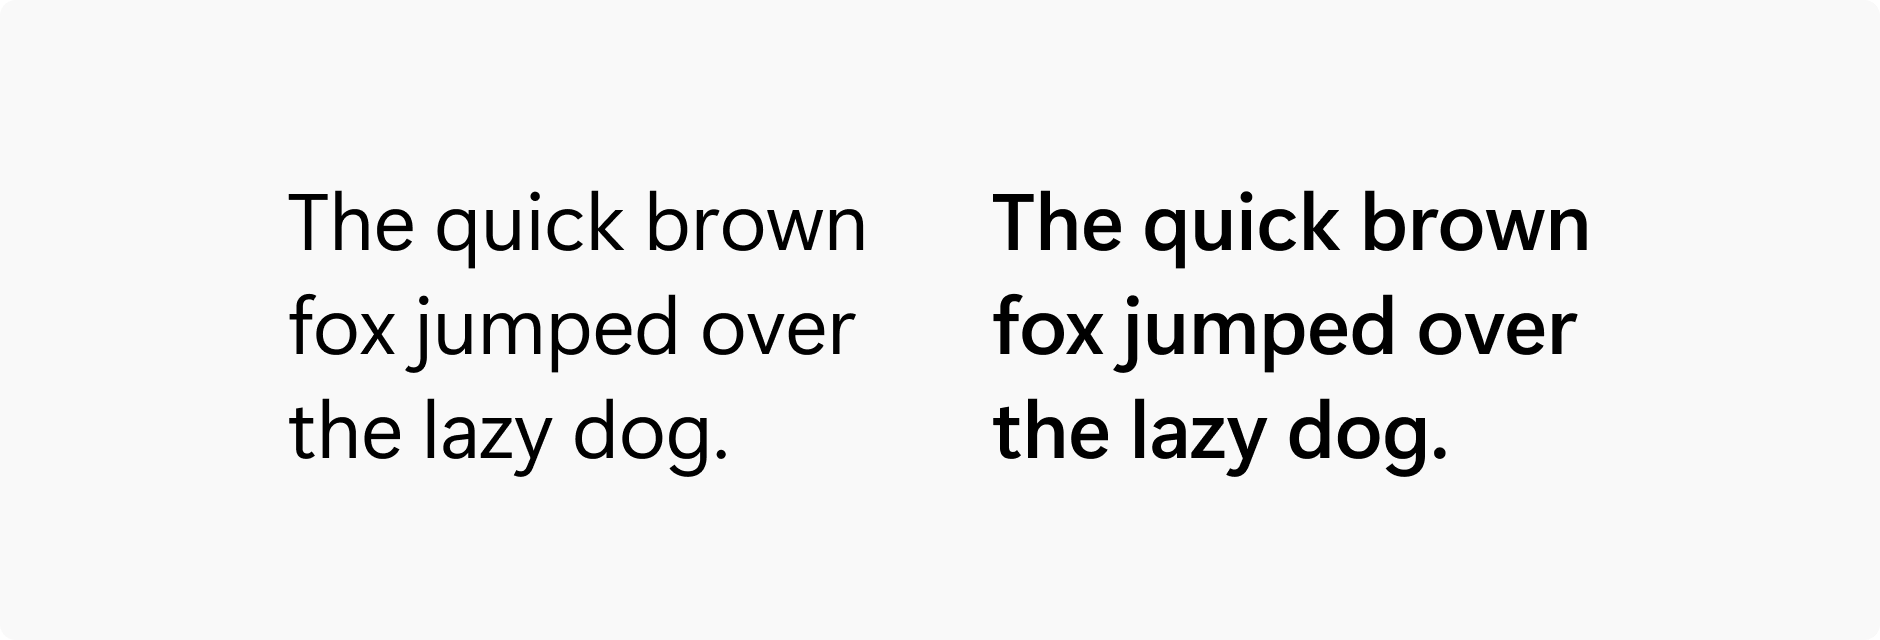 Two strings of the phrase "The quick brown fox jumped over the lazy dog" side by side. The one on the right has a heavier font weight.